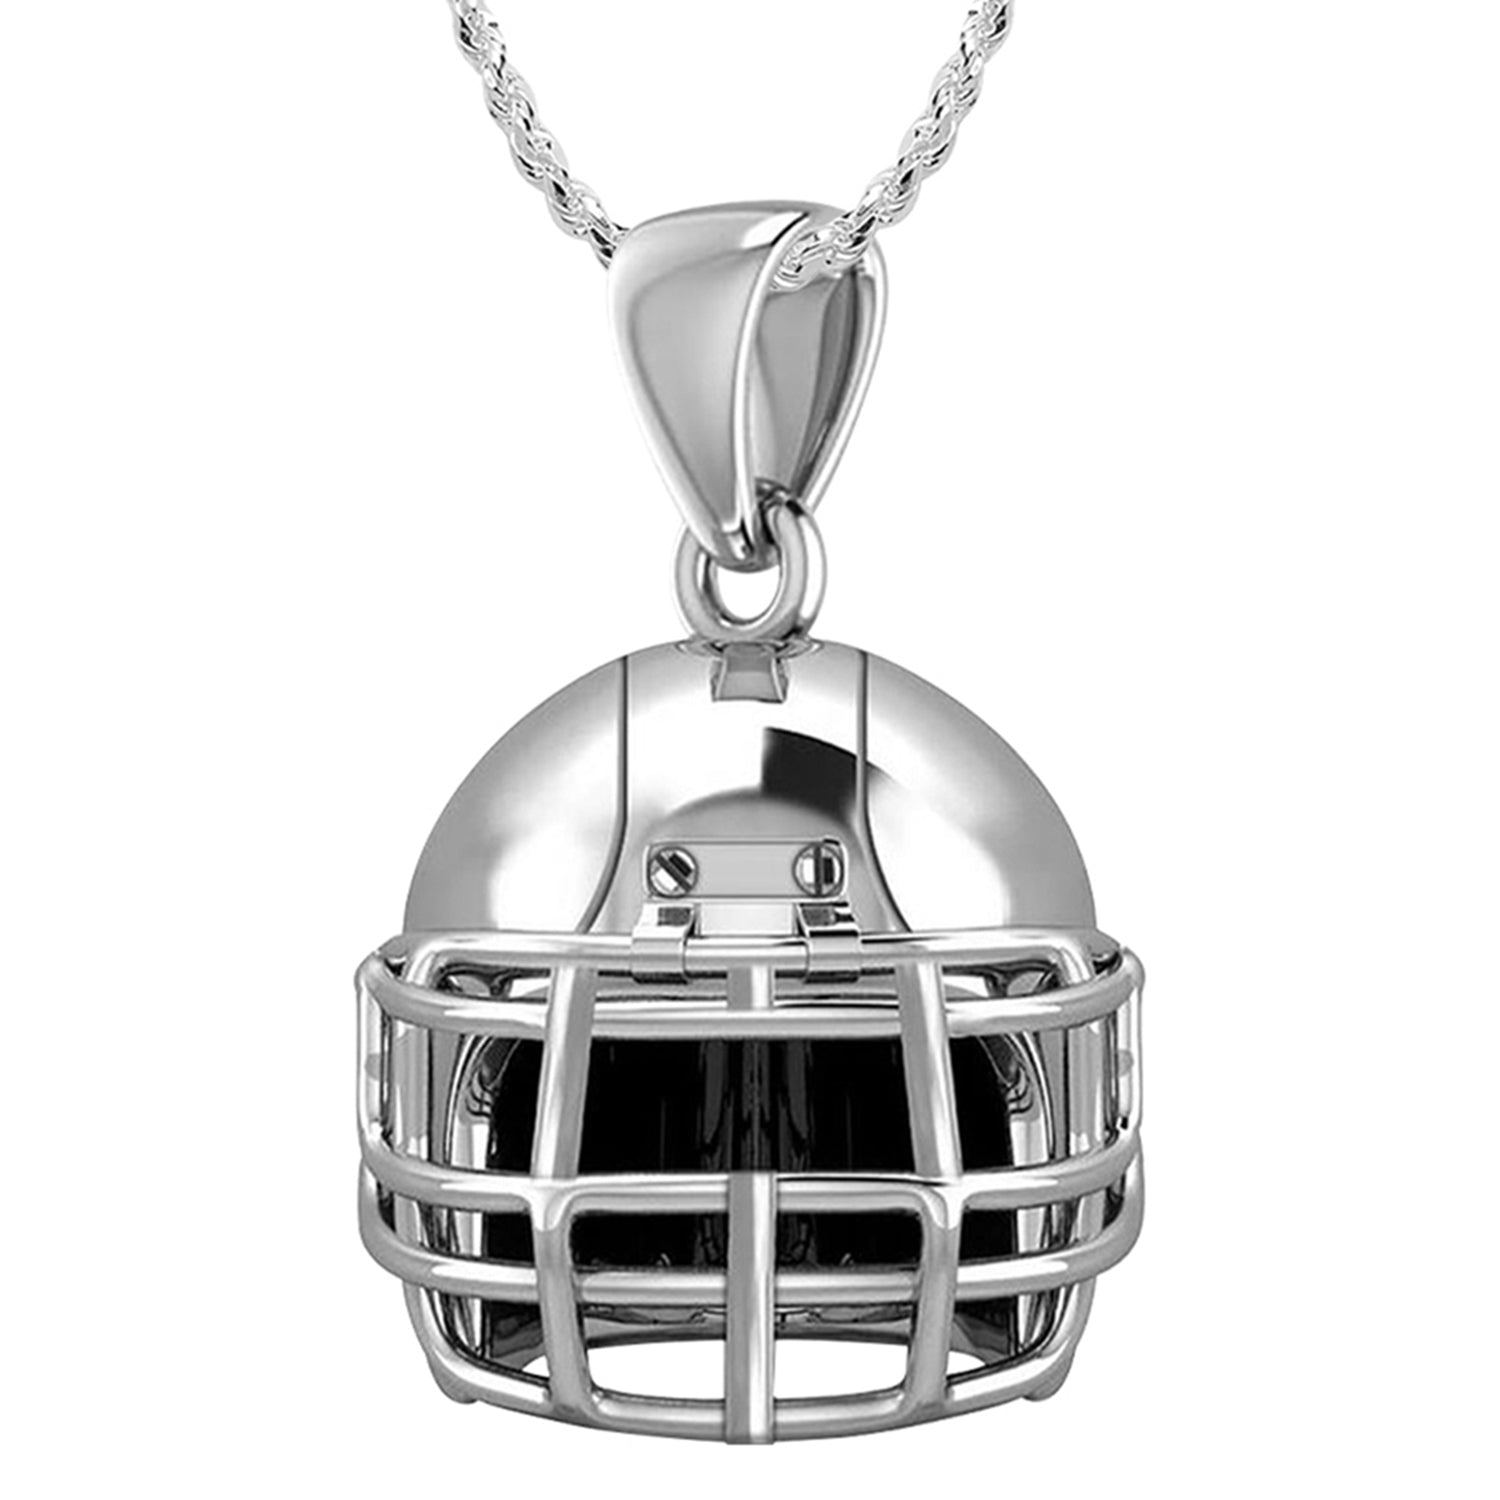 Small 925 Sterling Silver 3D Football Helmet Pendant Necklace, 16.5mm - US Jewels